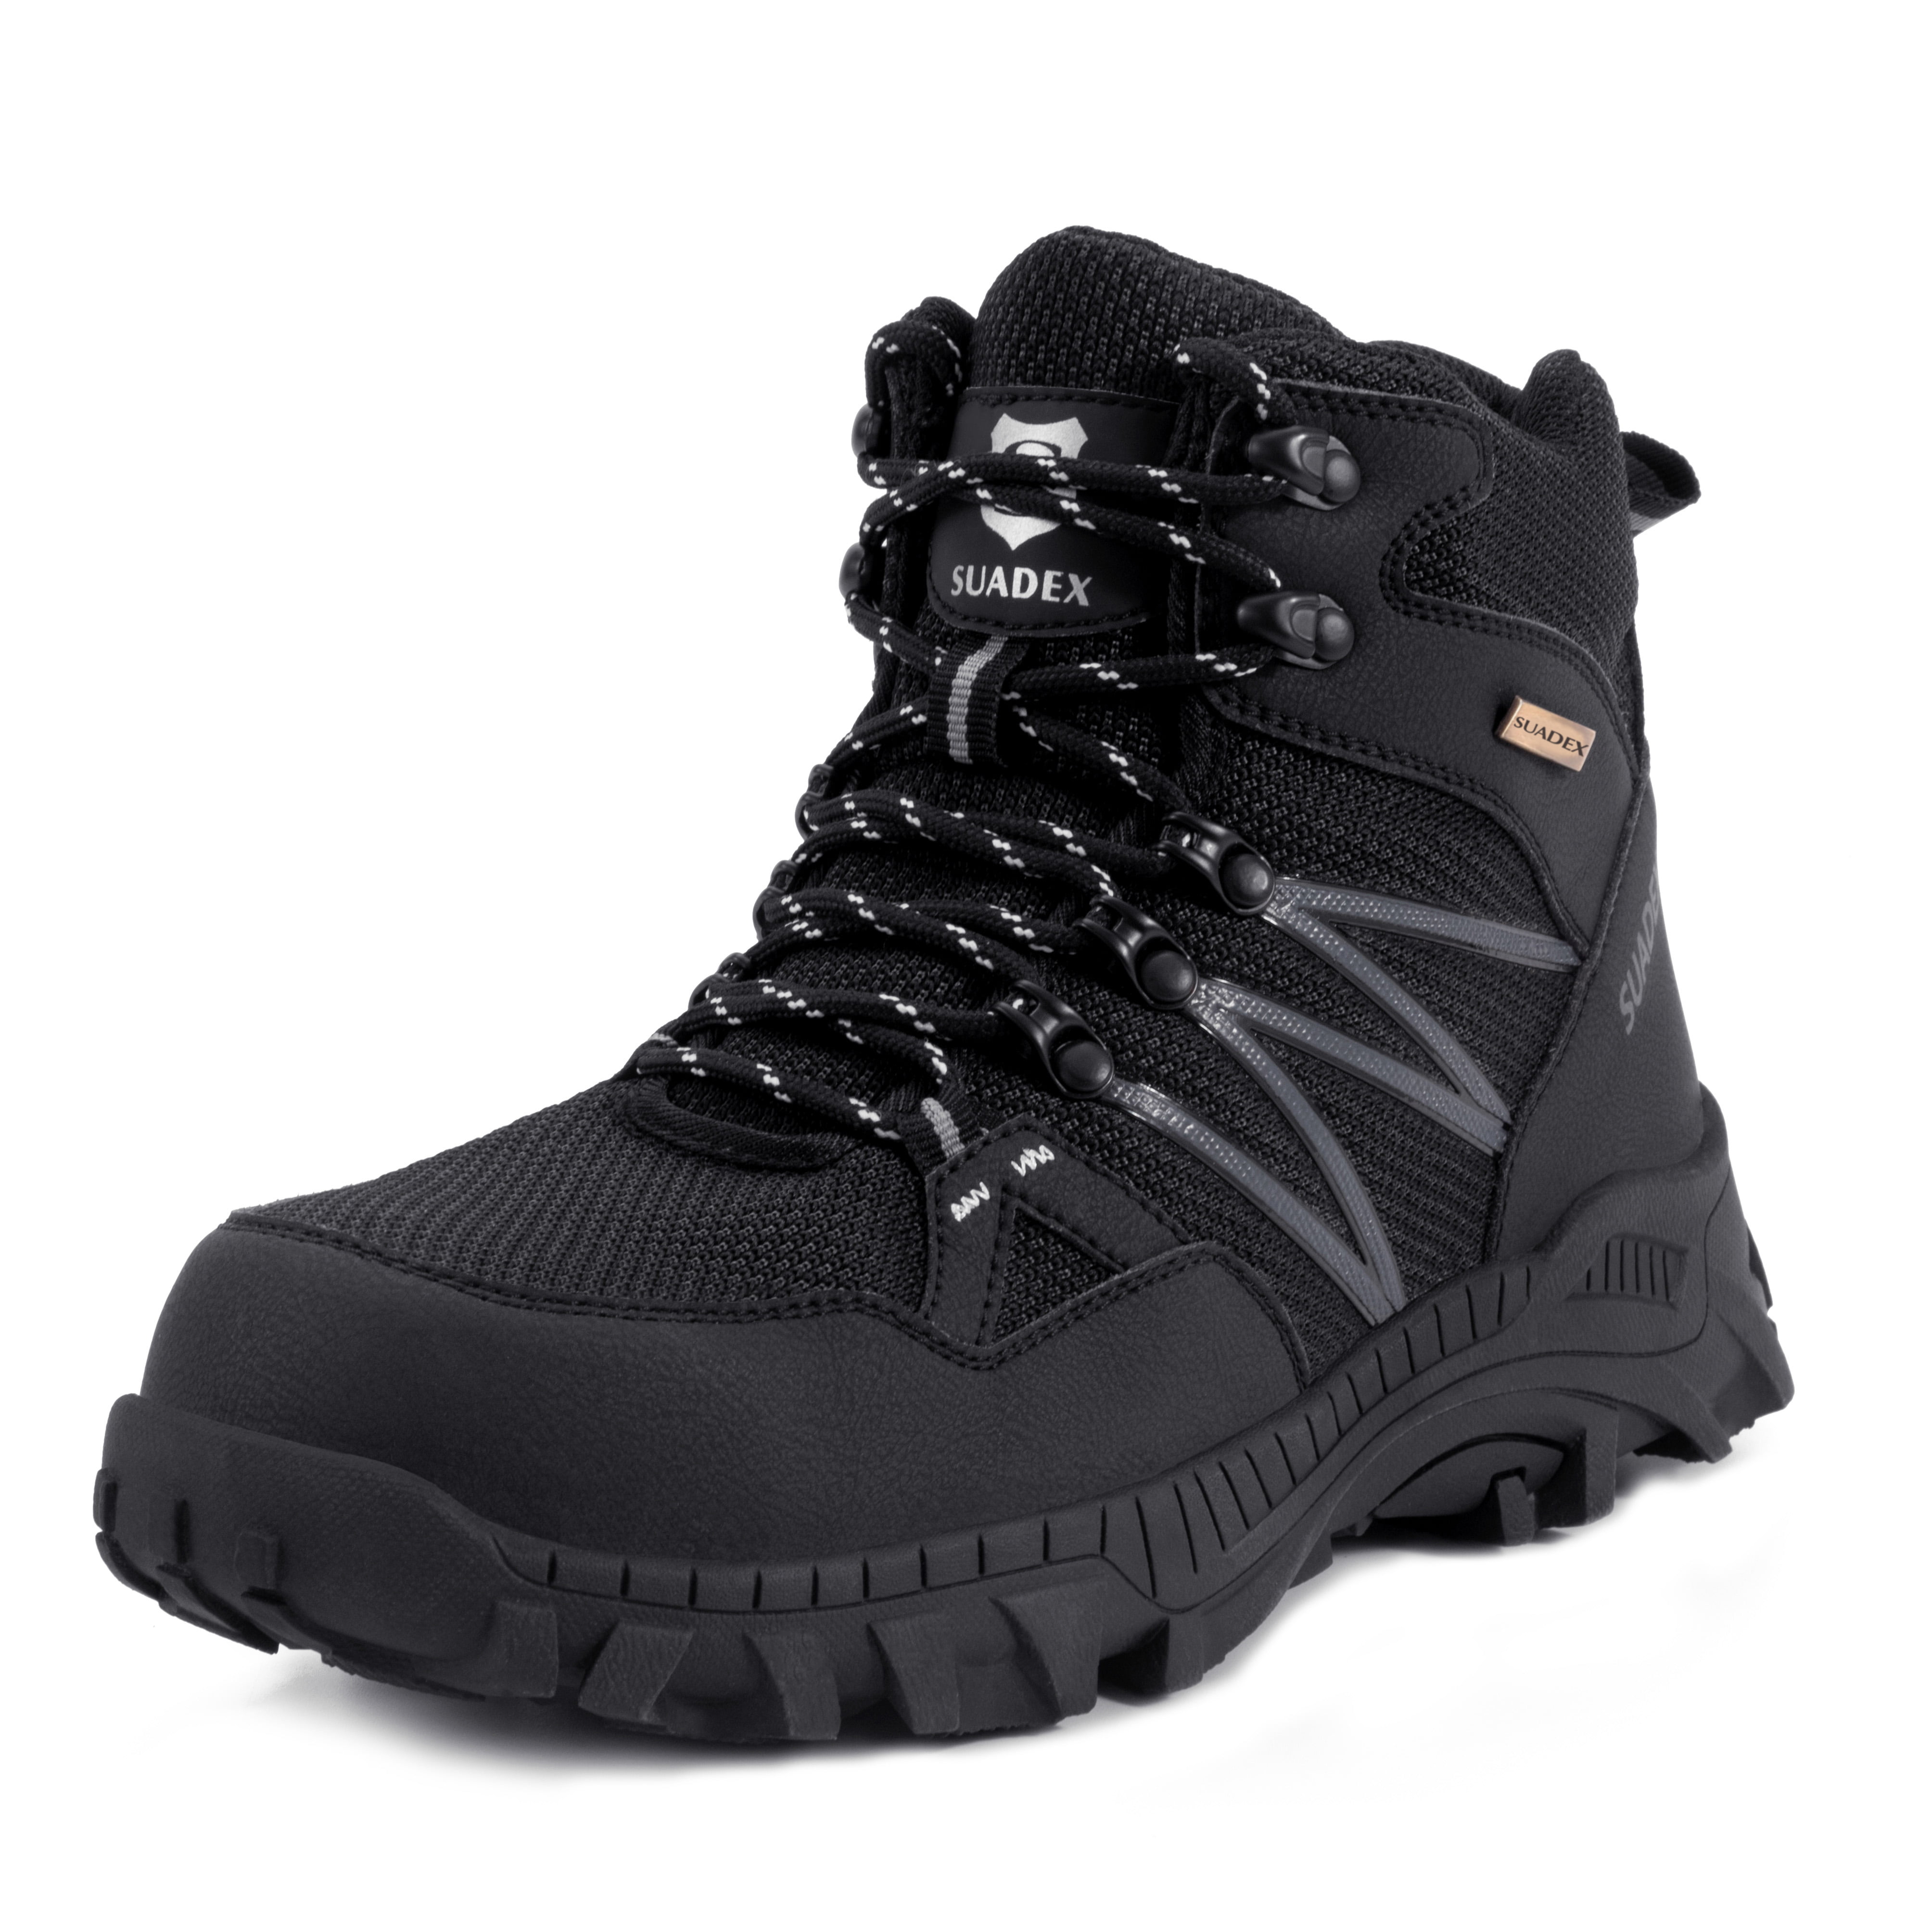 Mens Indestructible Safety Steel Toe Work Boots Sport Shoes Lightweight Sneakers 